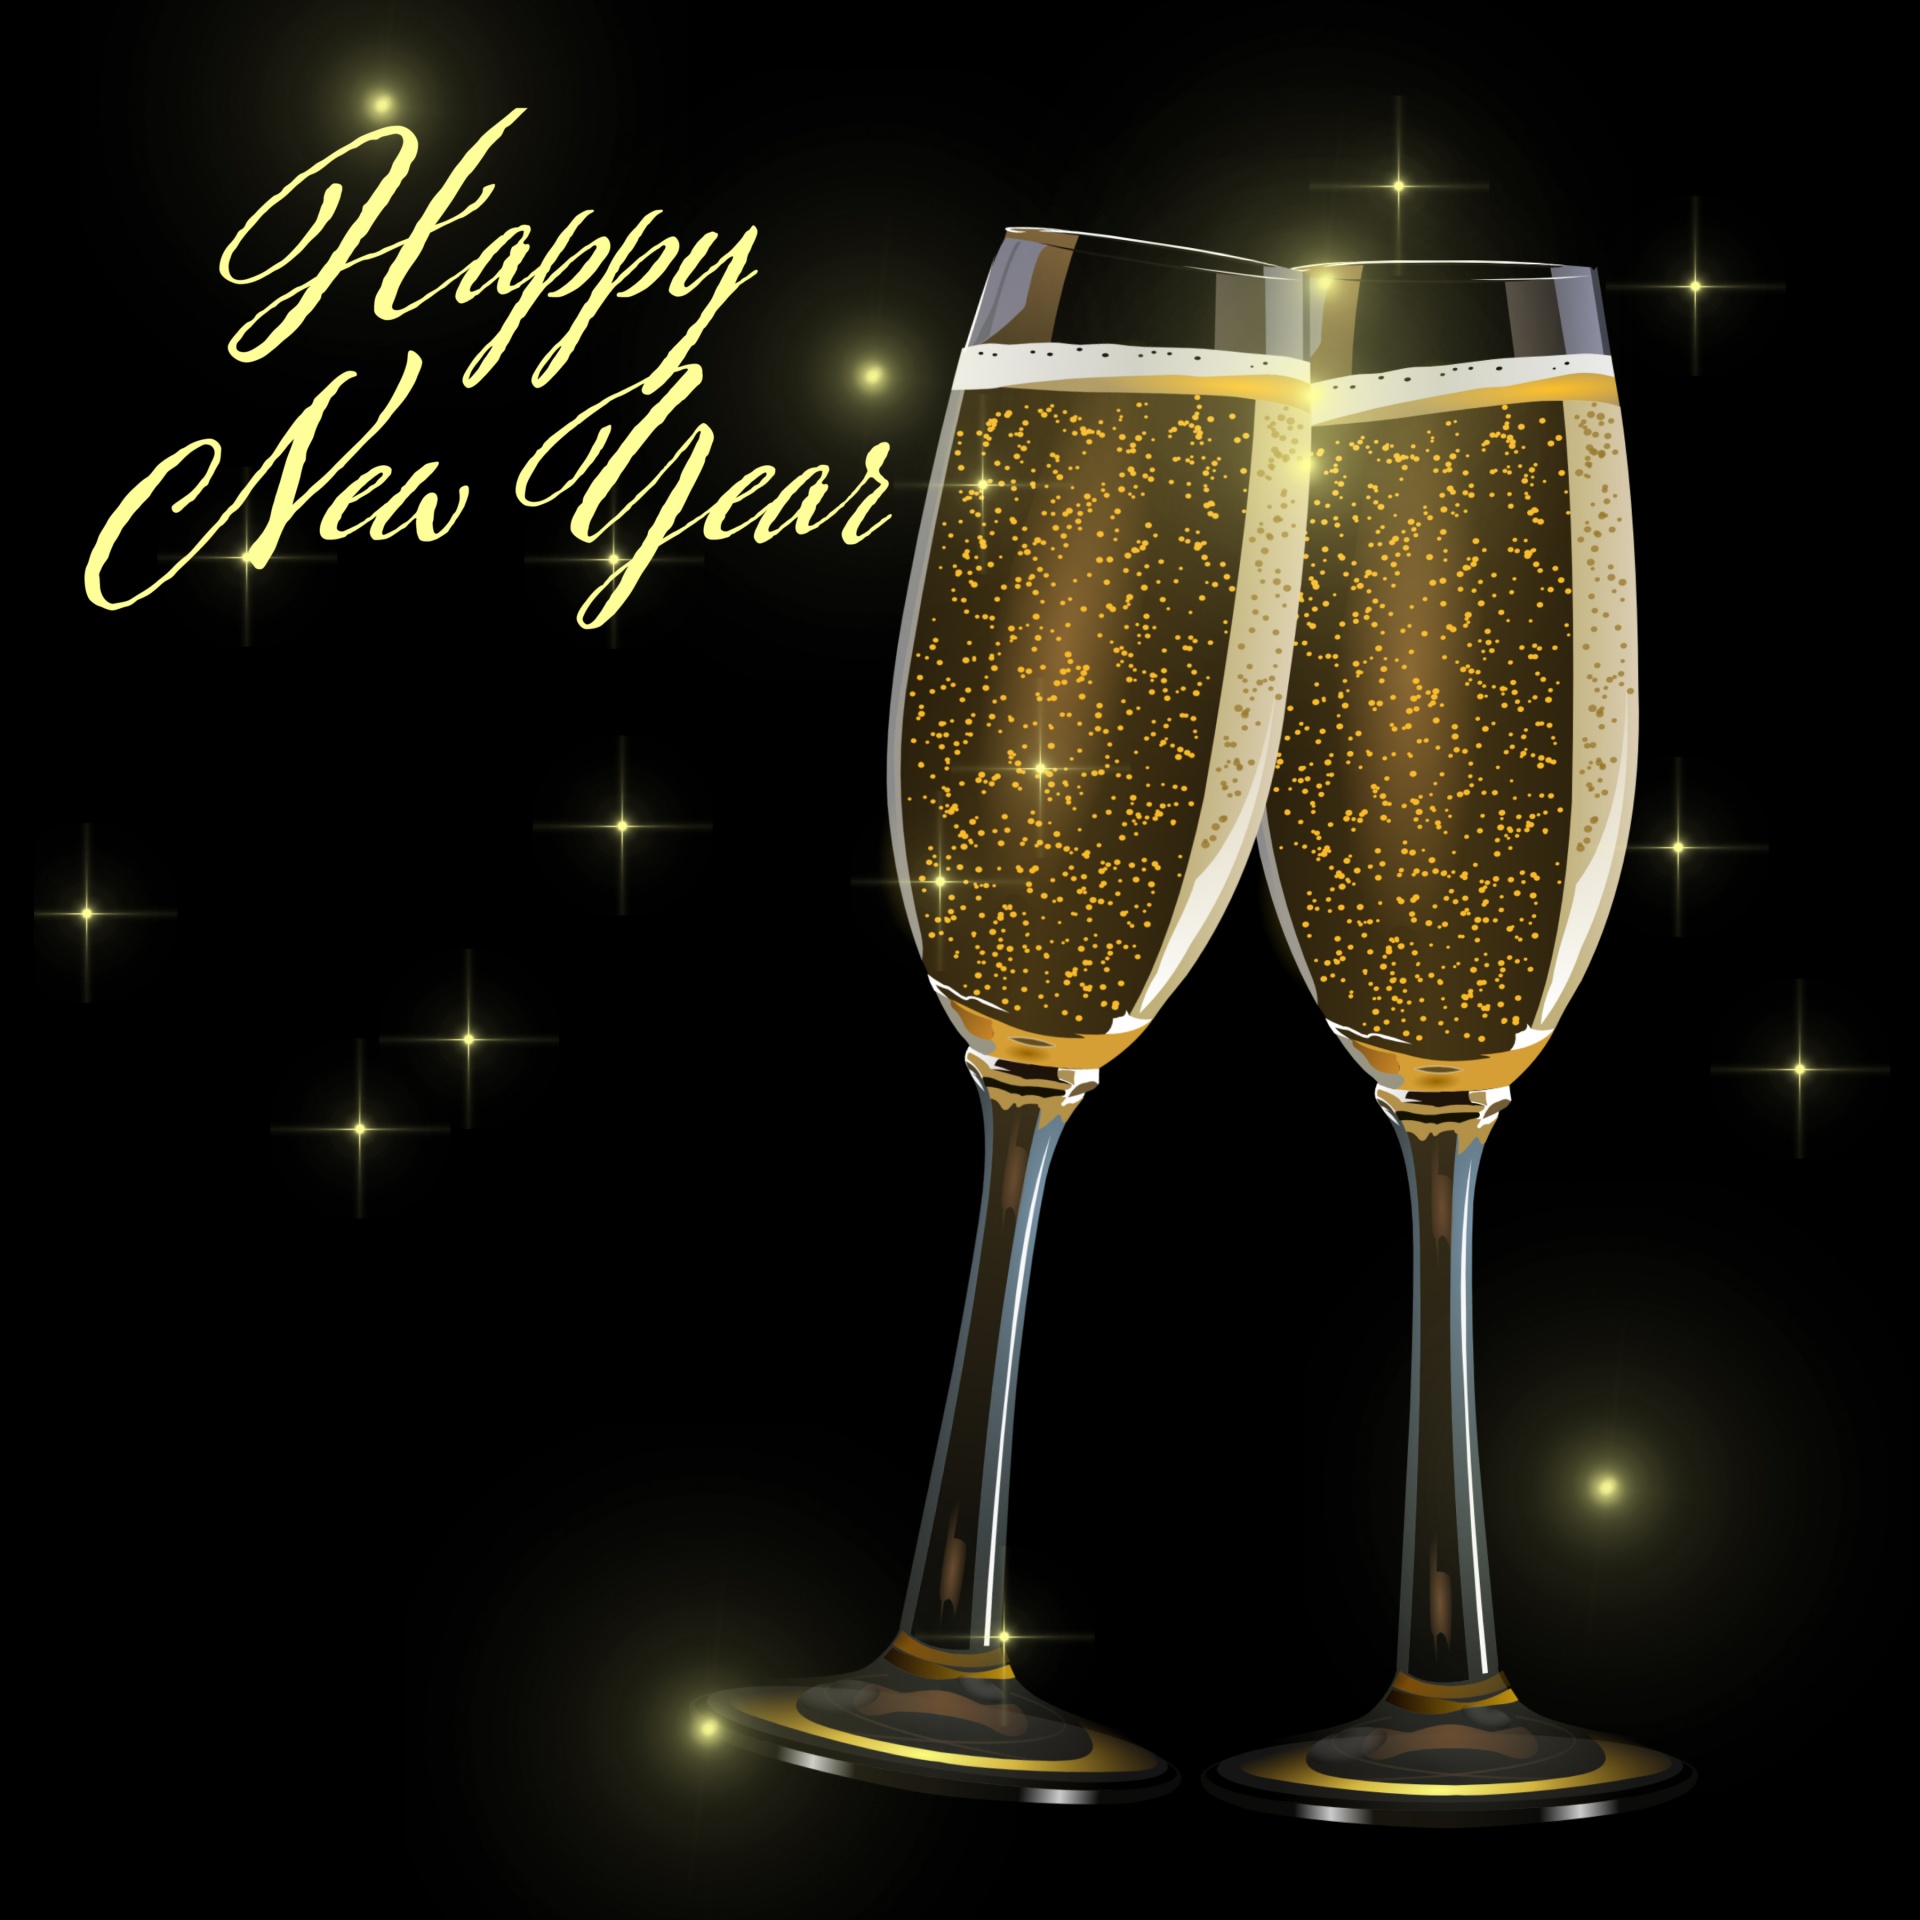 Collection 102+ Images happy new year 2022 champagne glasses Excellent